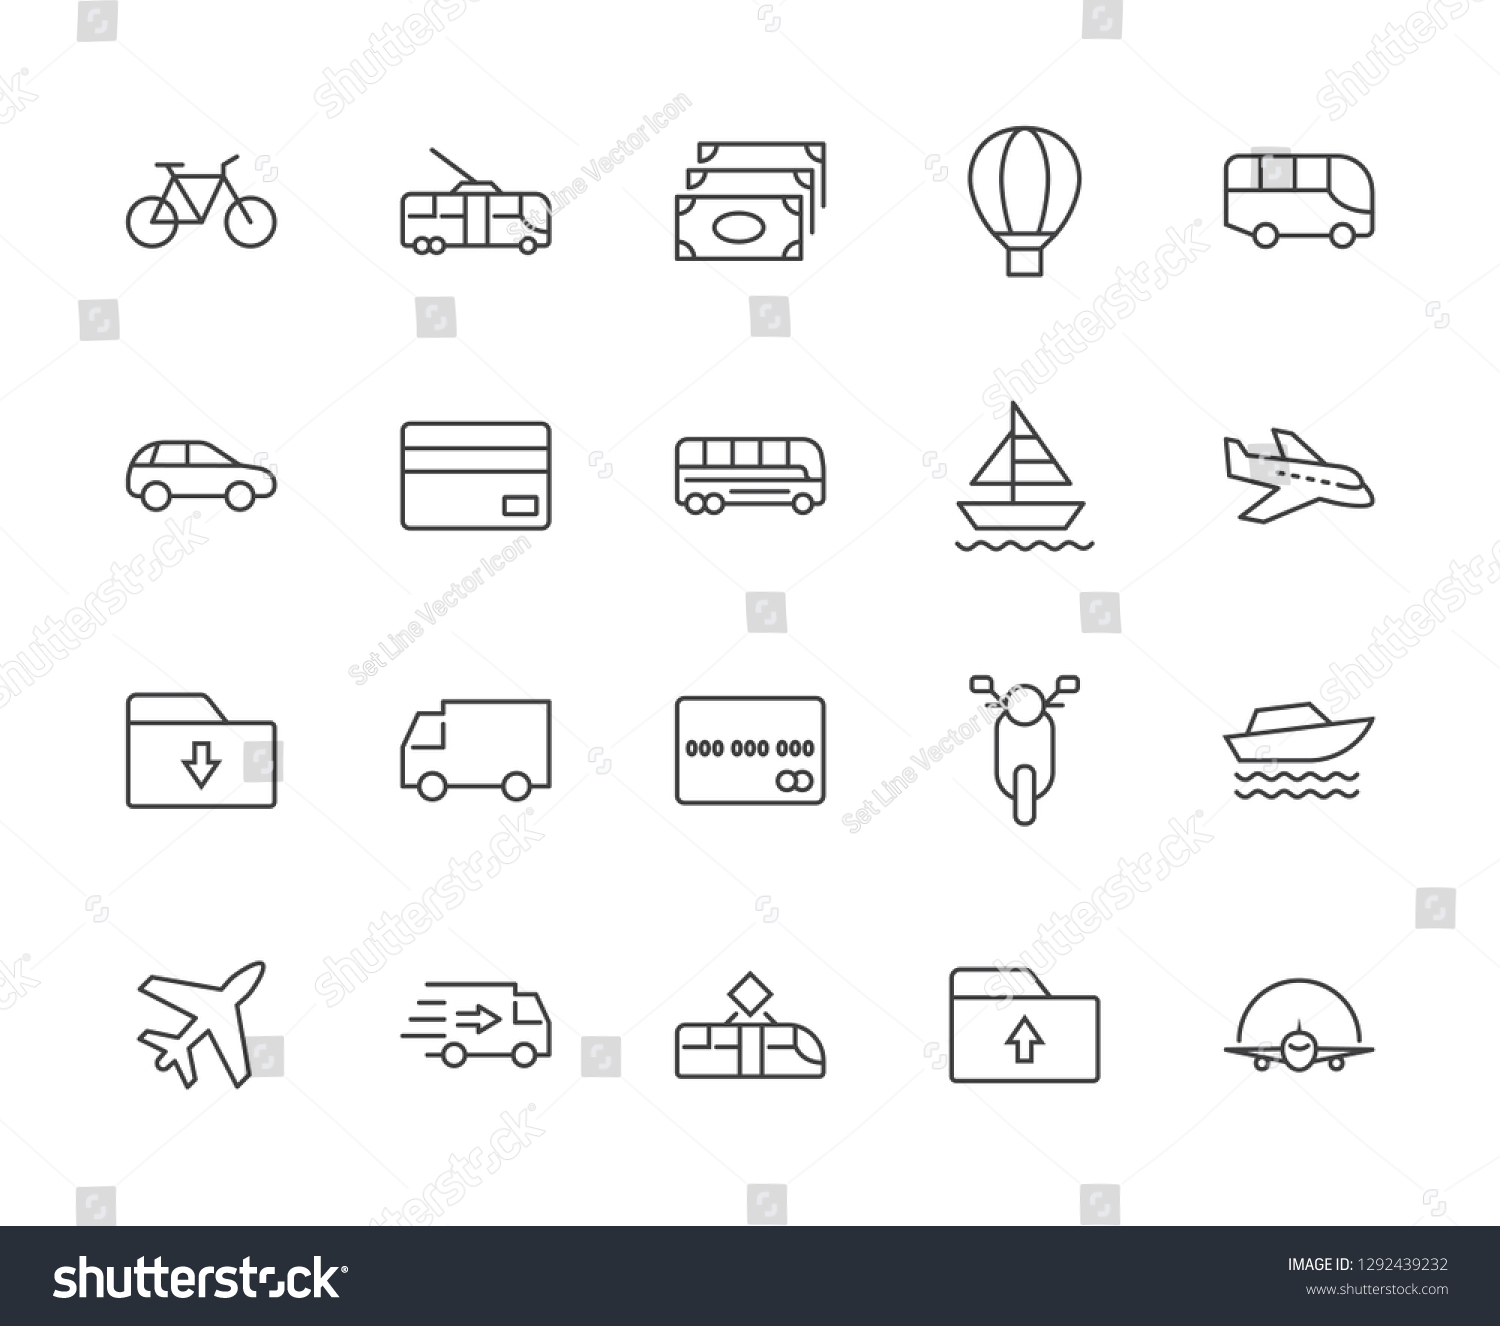 Set of Public Transport Related Vector Line Icons. Contains such Icons as Bus, Bike, Scooter, Car, balloon, Truck, Tram, Trolley, Sailboat, powerboat, Airplane and more. Editable Stroke. 32x32 Pixel #1292439232